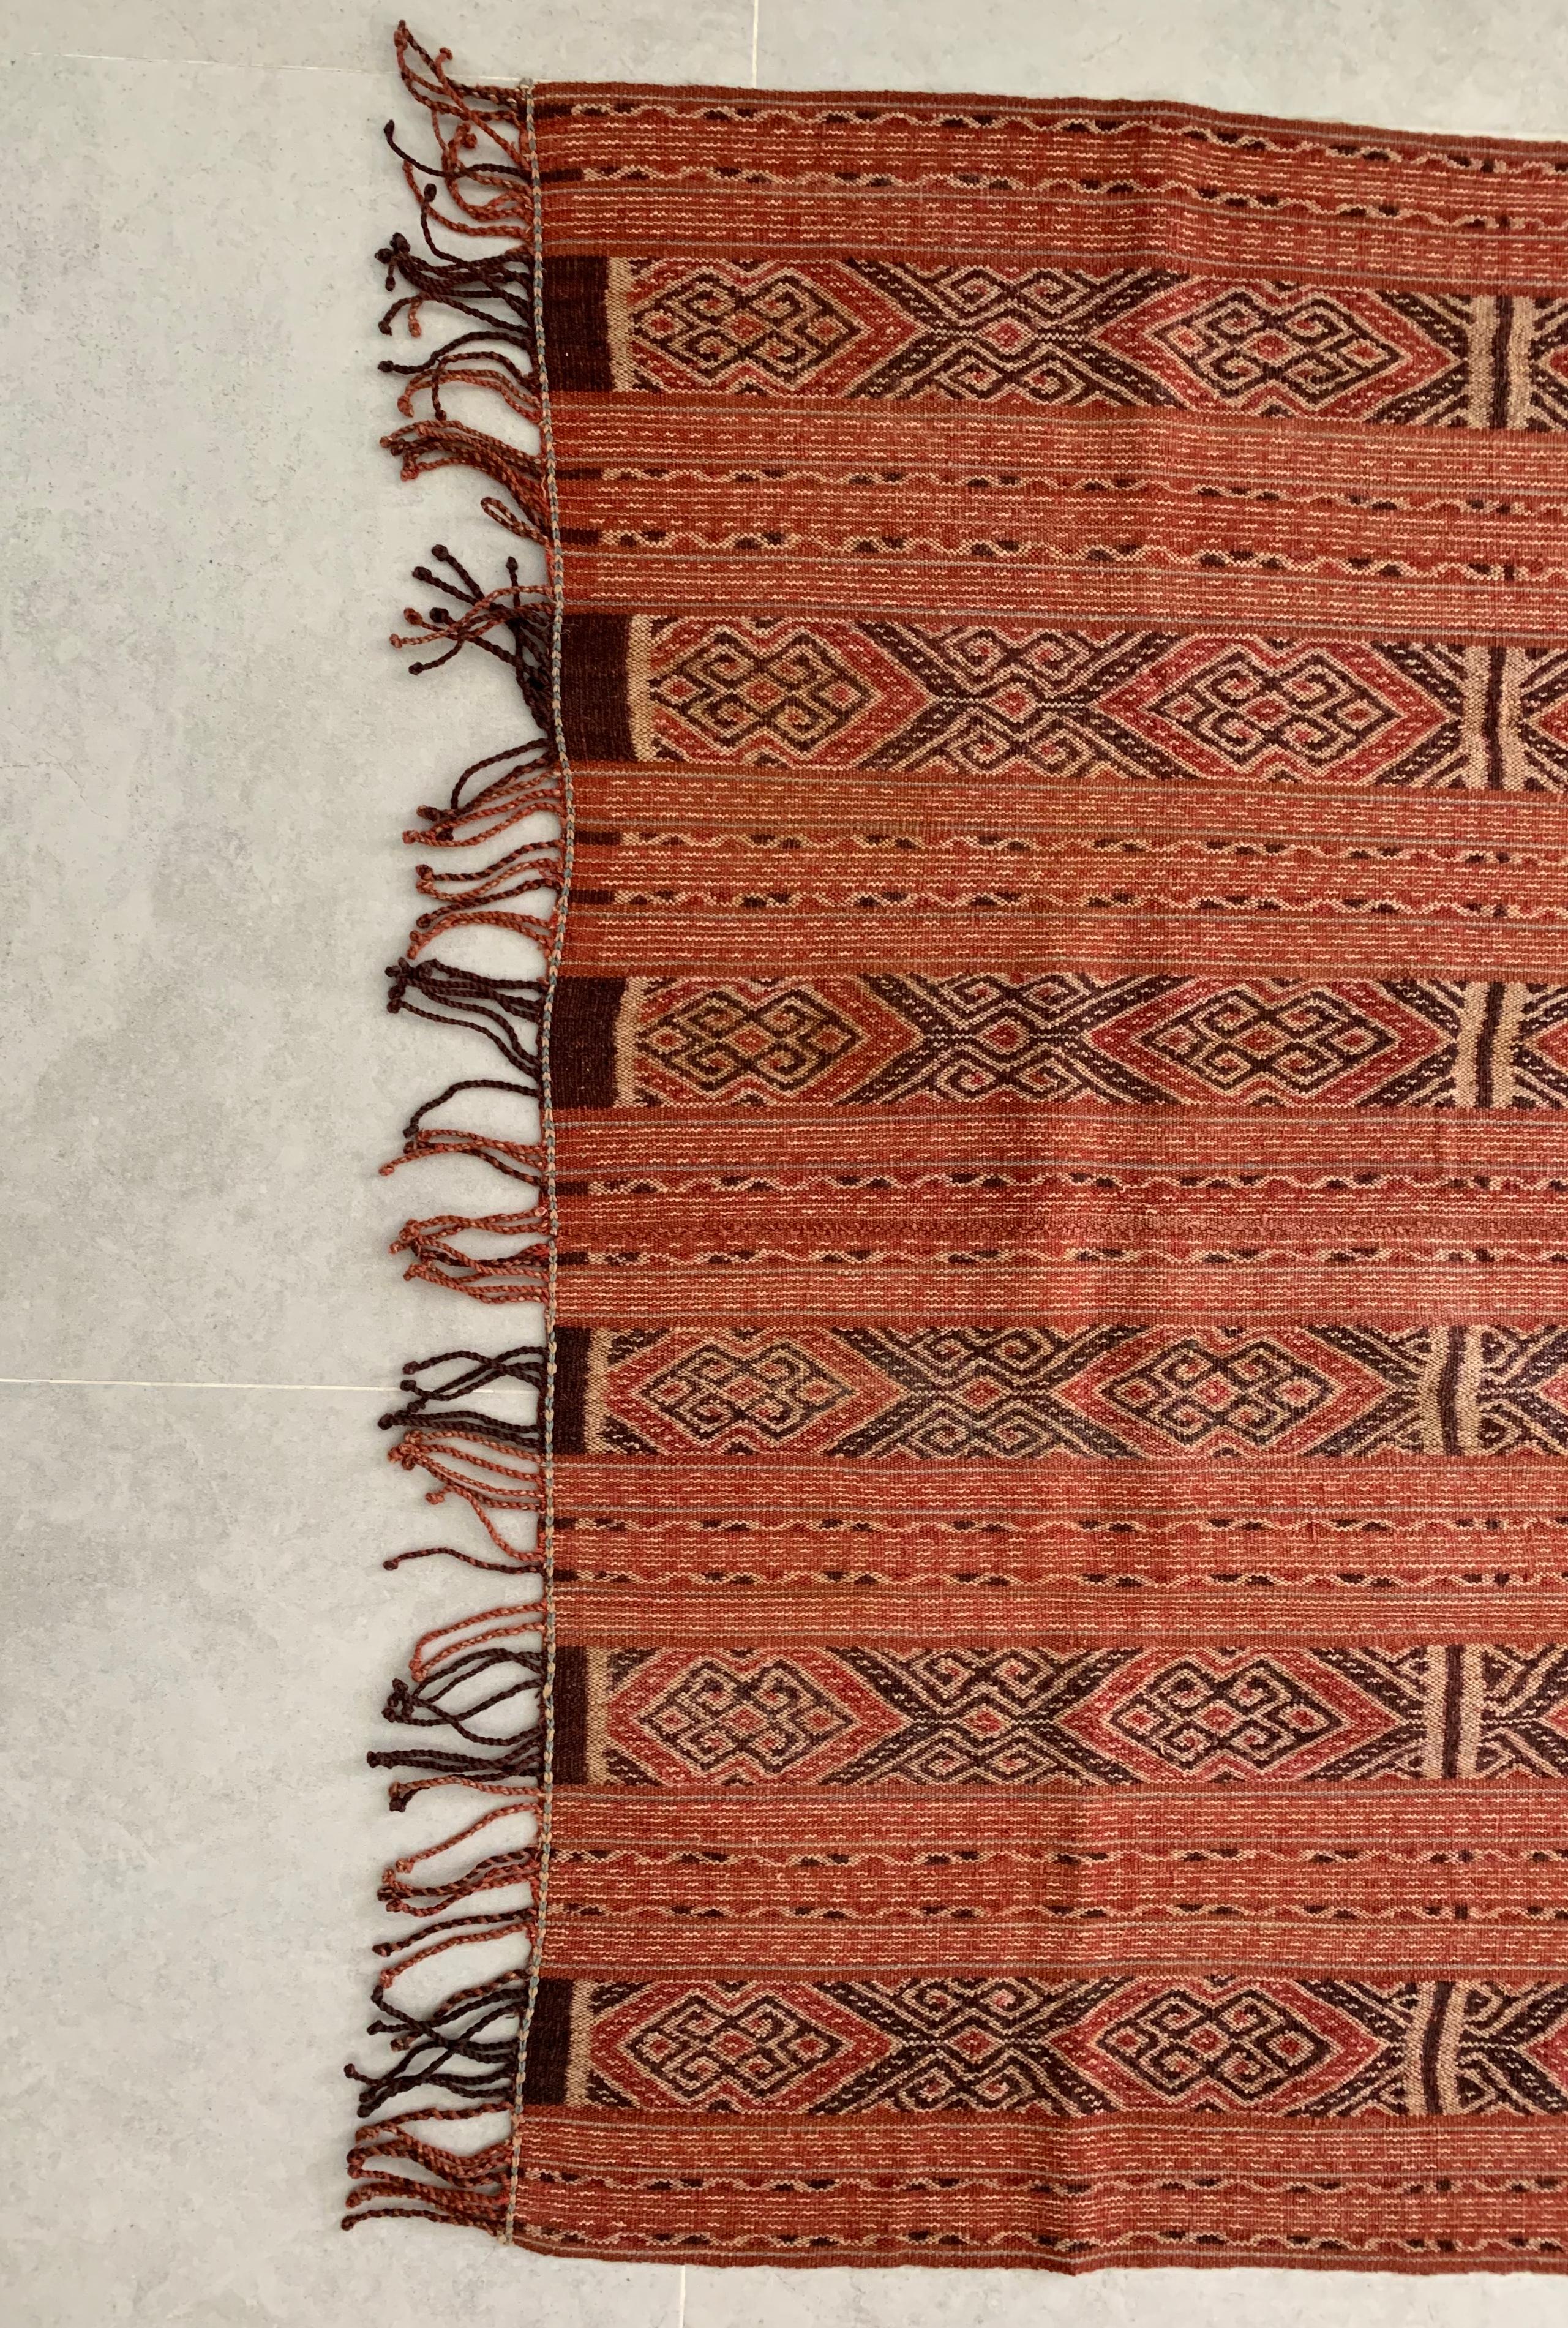 Hand-Woven Ikat Textile from Timor Island, Indonesia For Sale